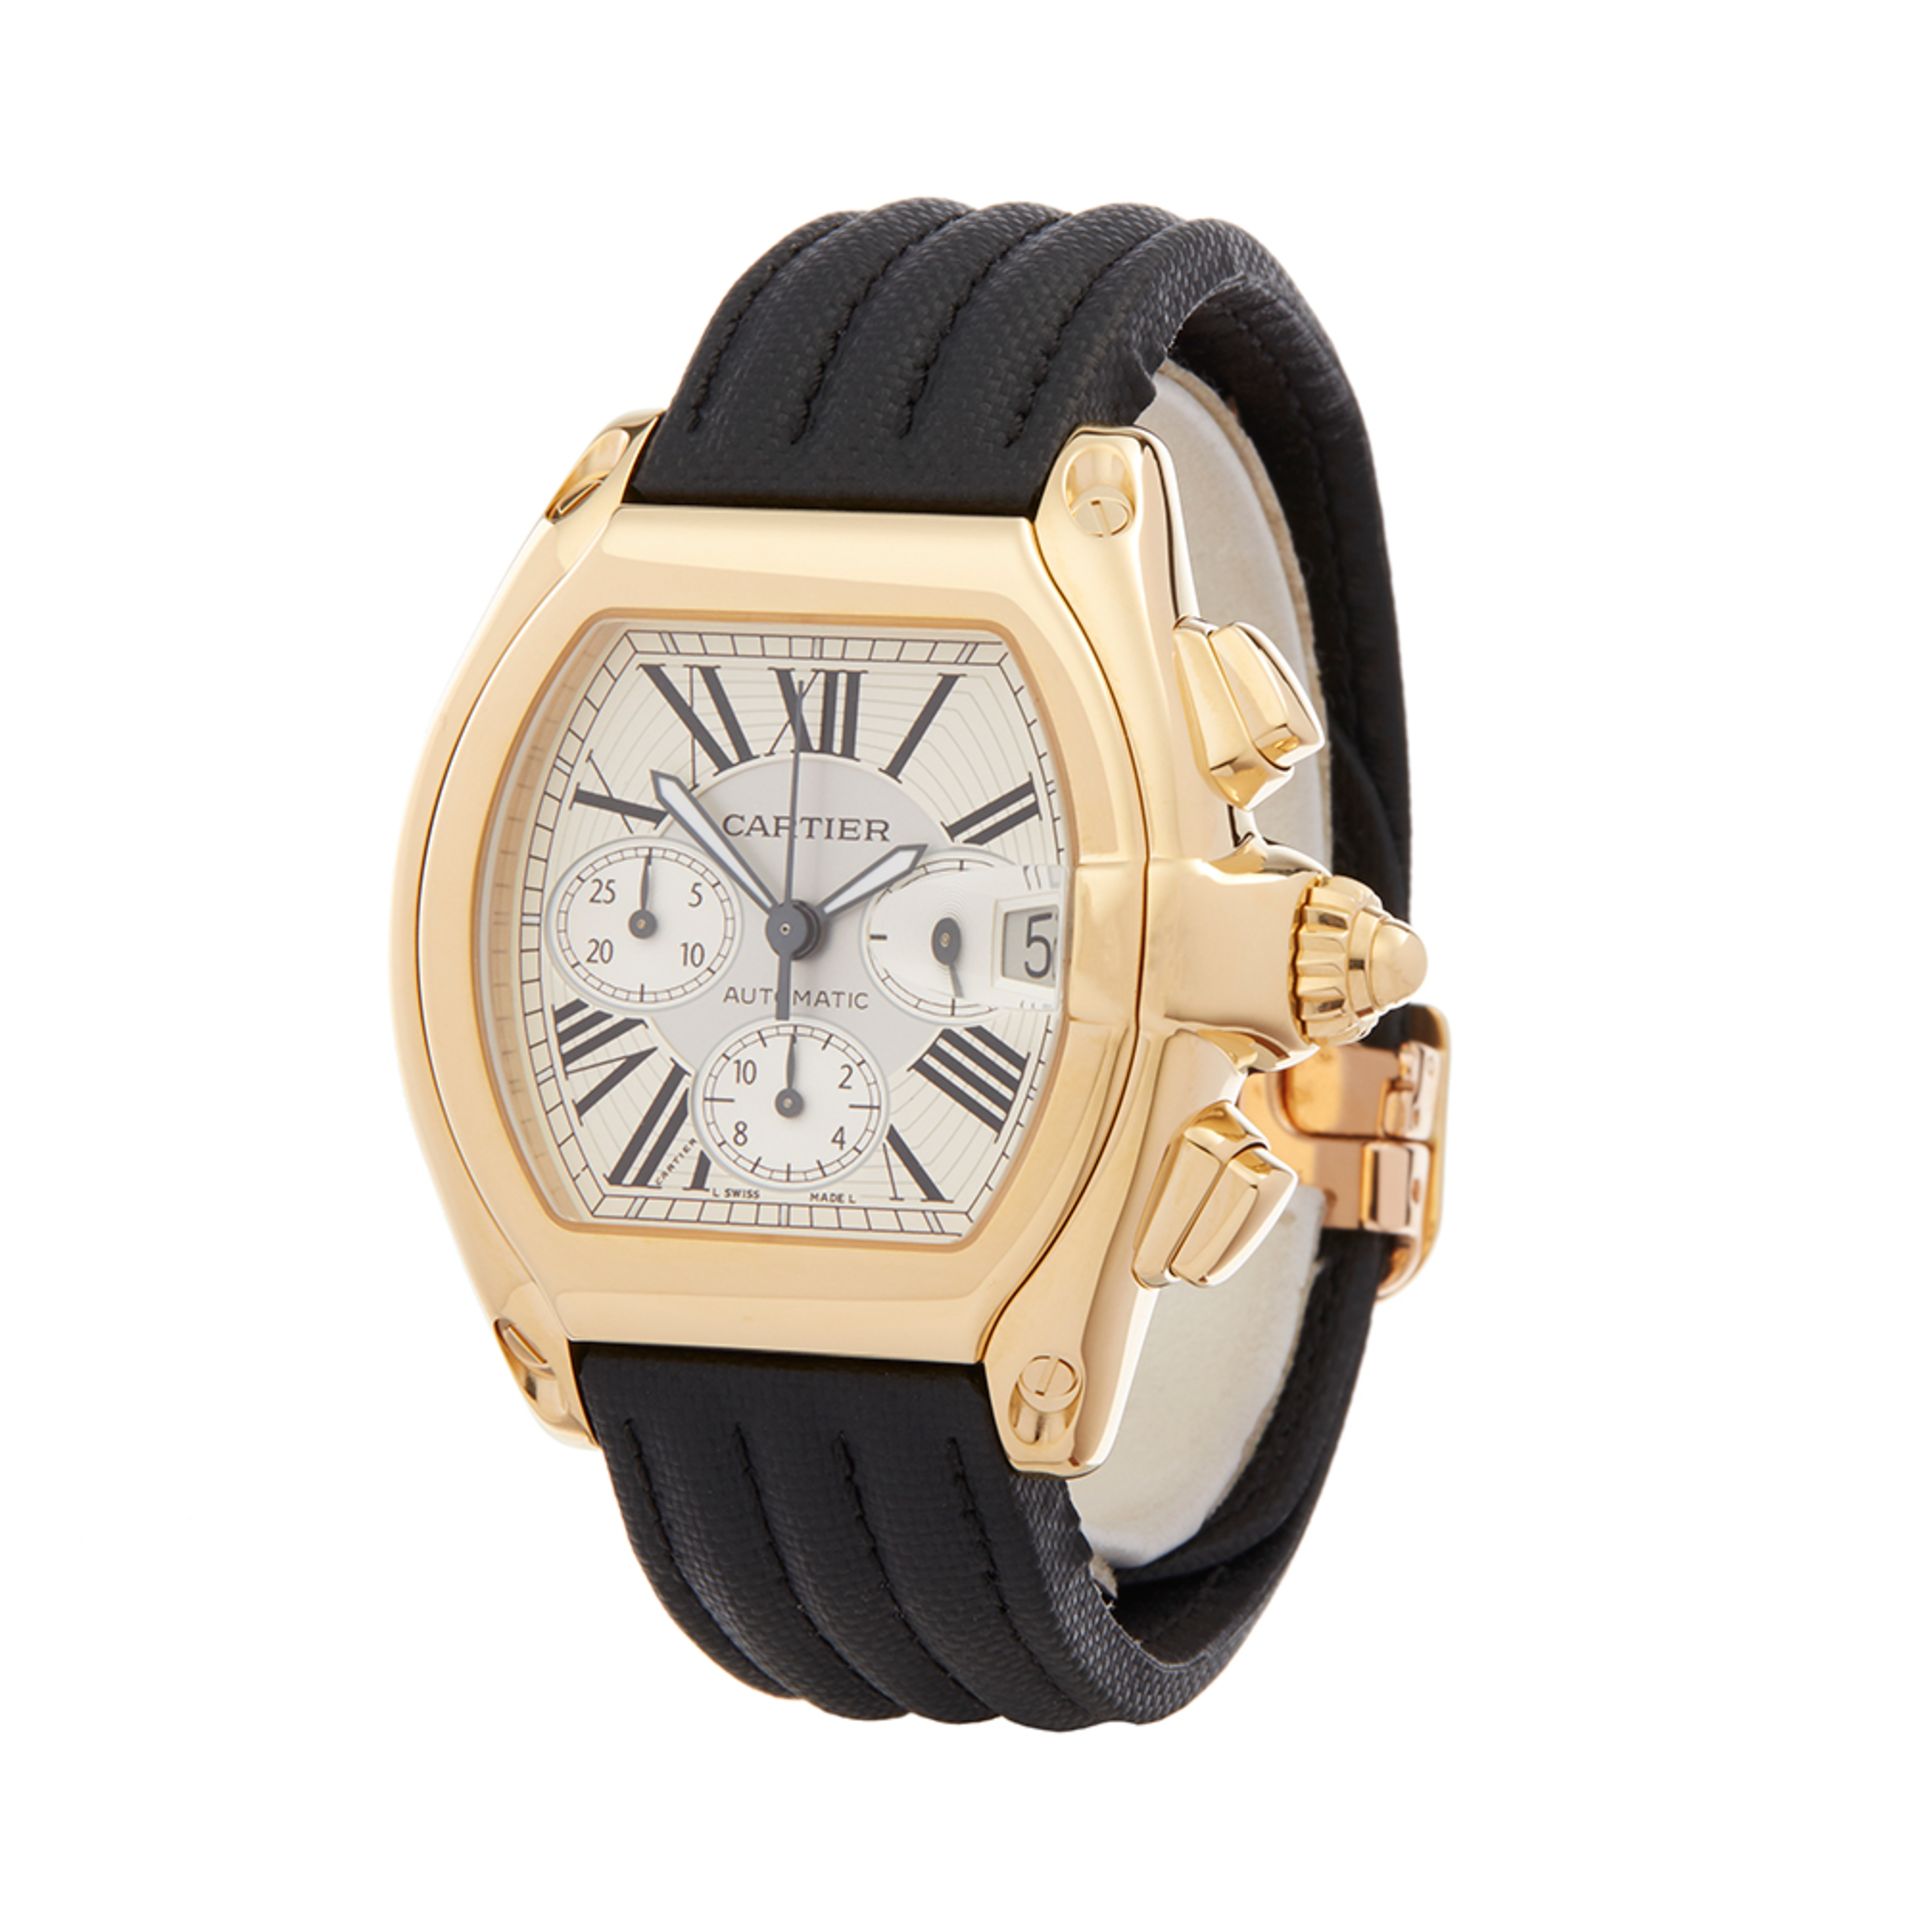 Cartier Roadster XL 18K Yellow Gold - W62021Y3 - Image 3 of 8